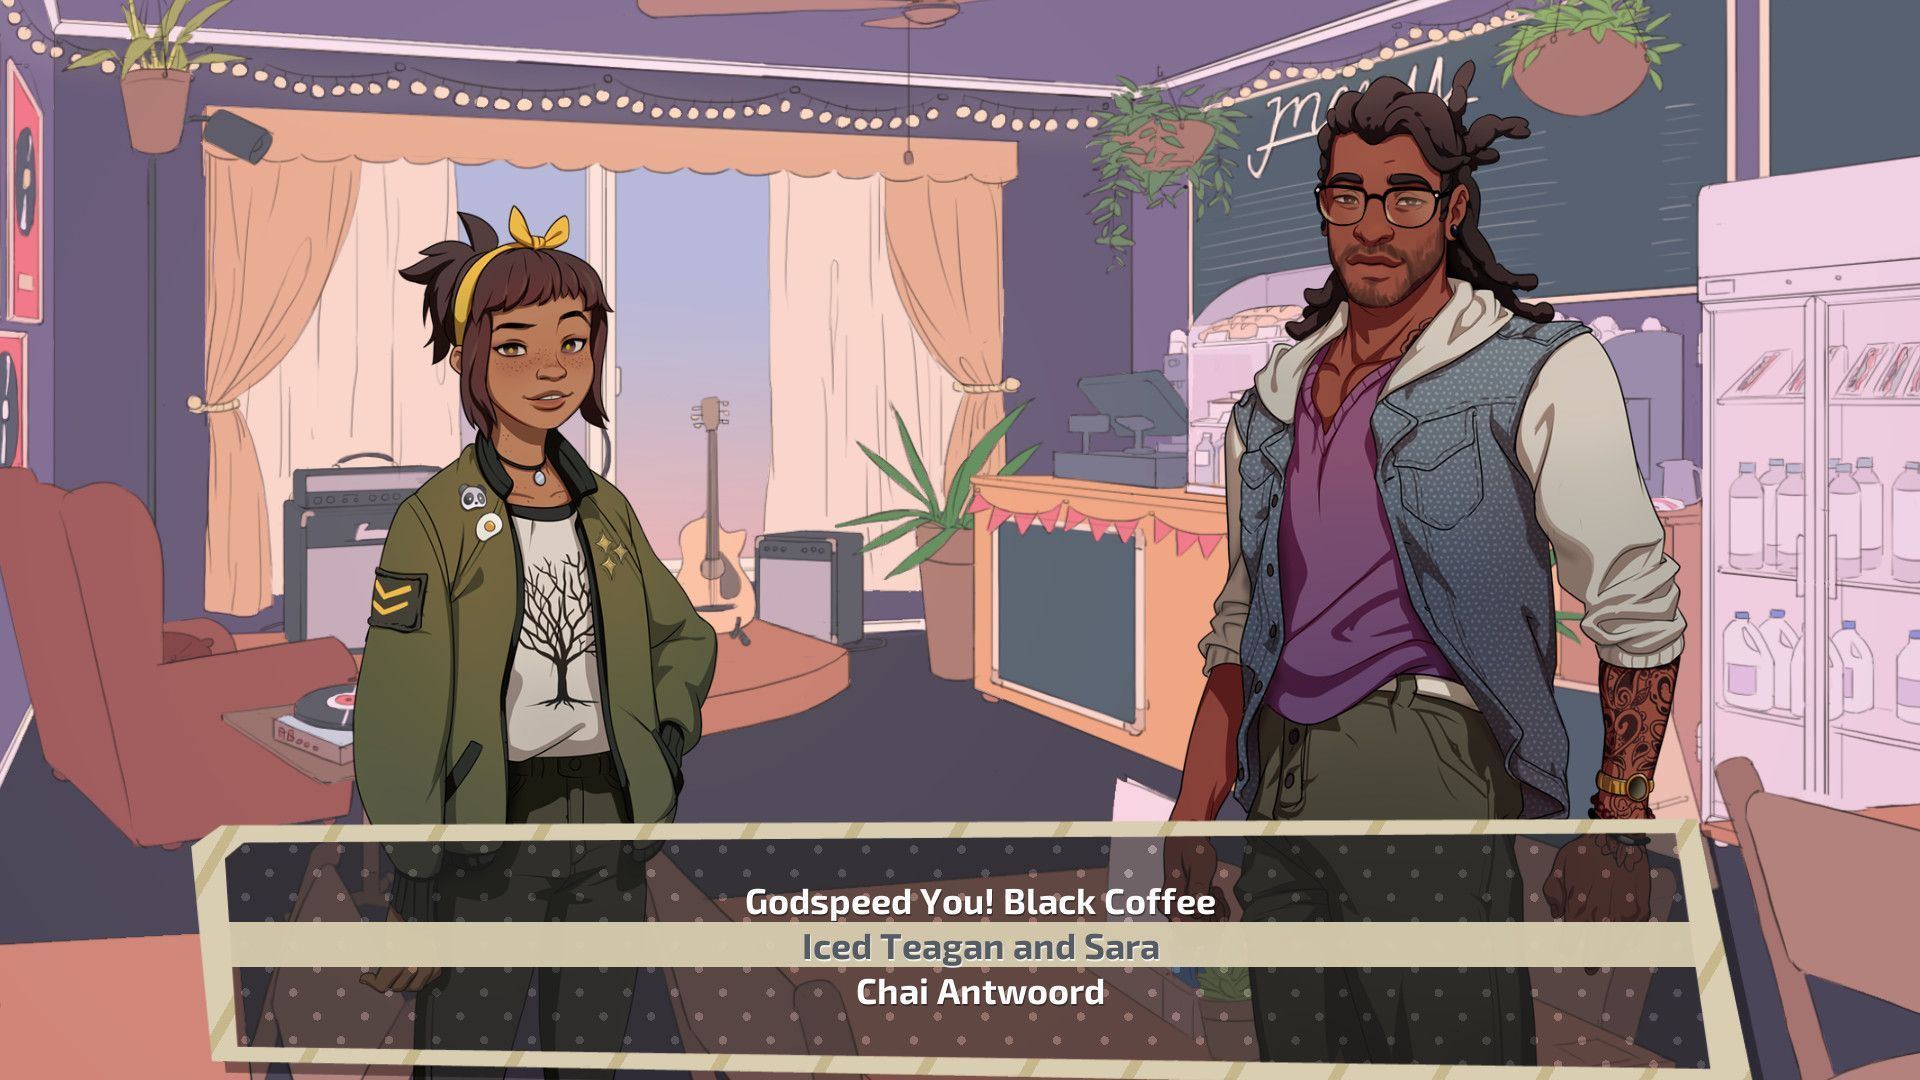 Katie from the kitchen dating simulation games